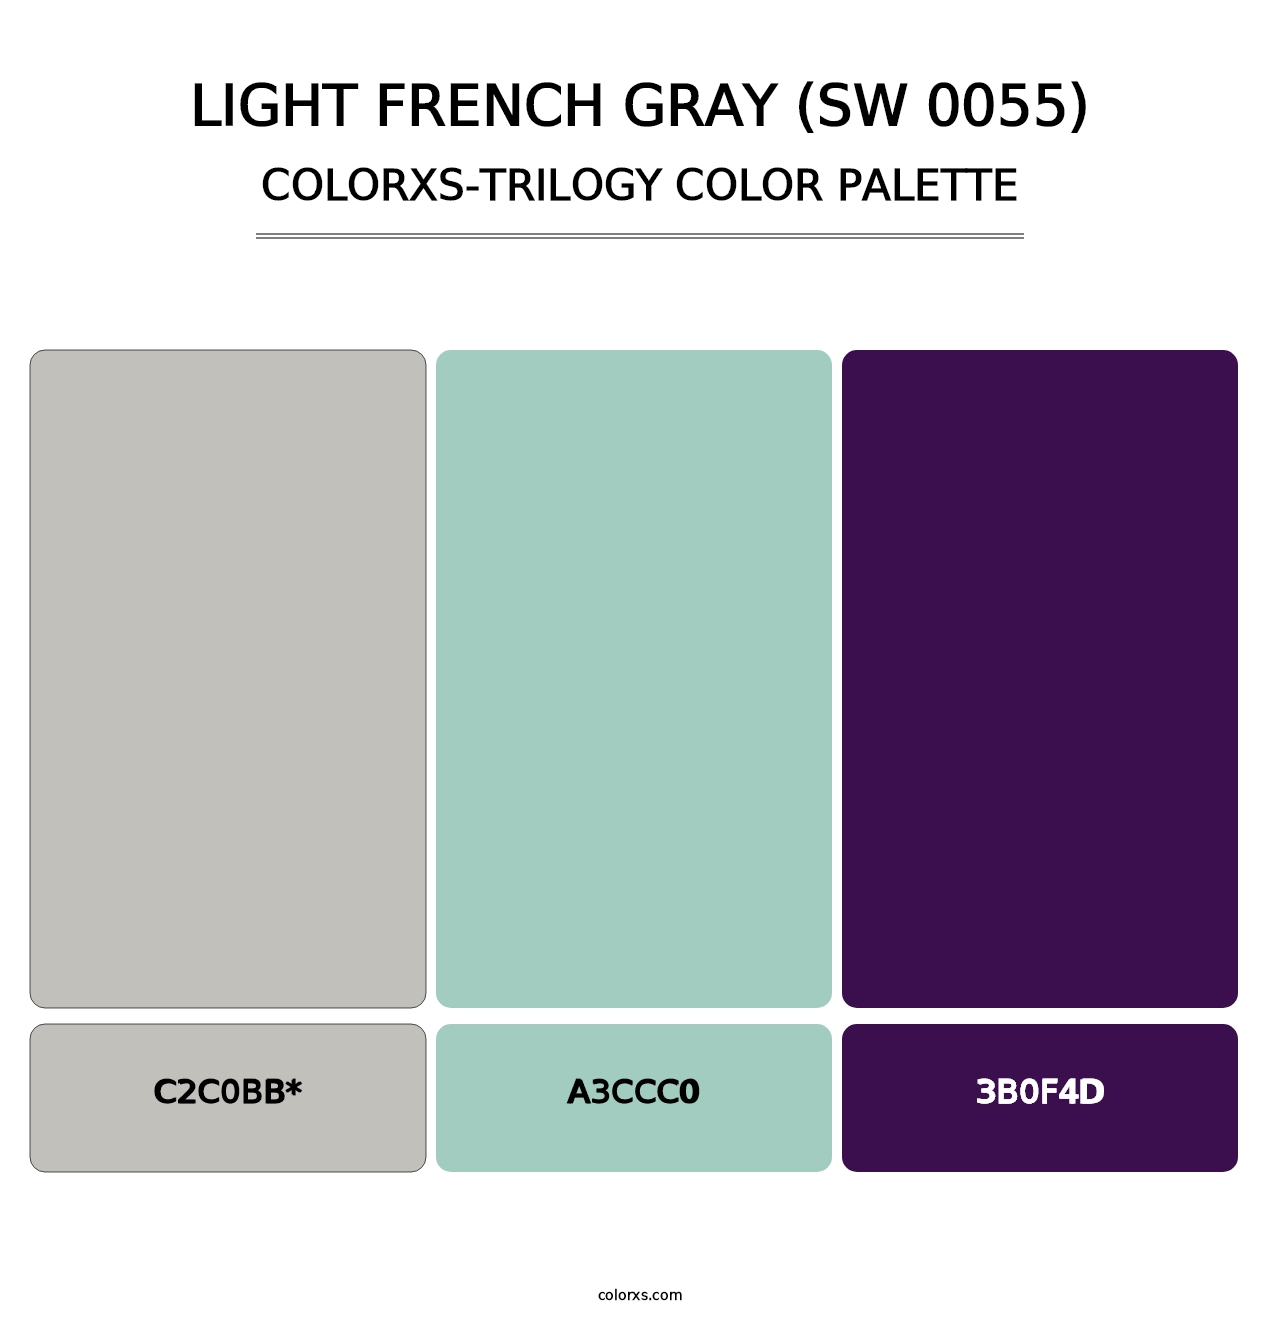 Light French Gray (SW 0055) - Colorxs Trilogy Palette